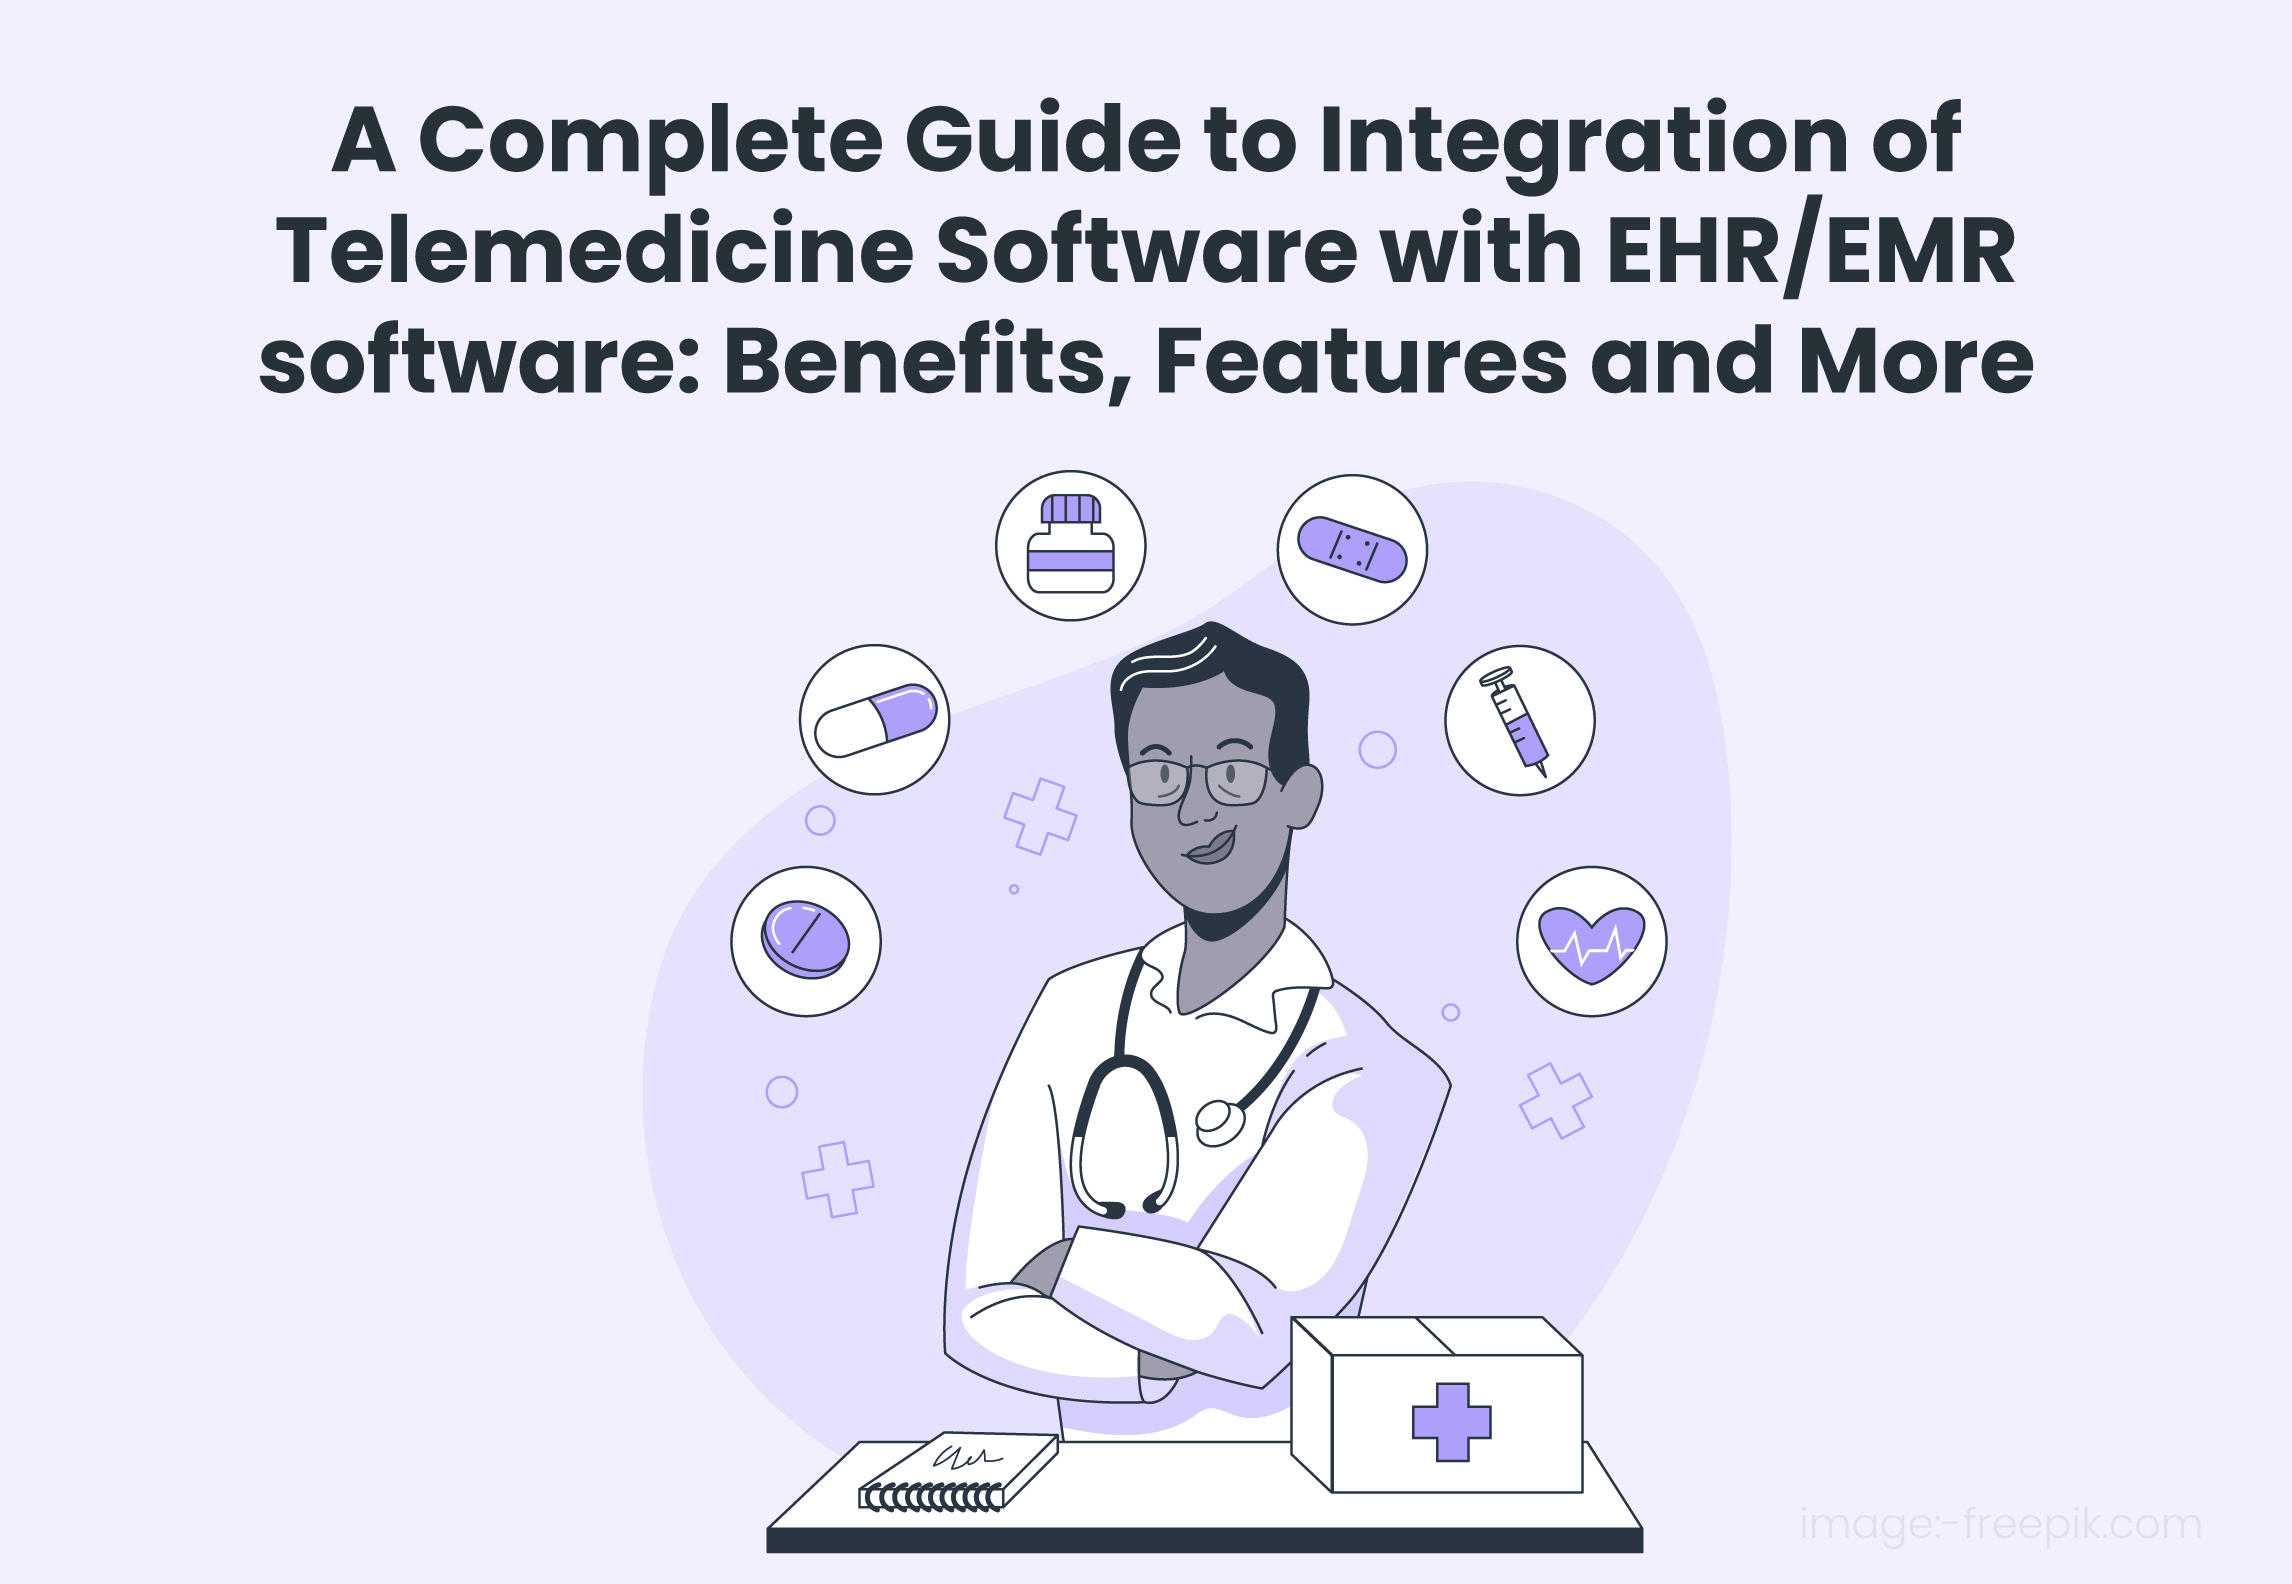 A Complete Guide to Integration of Telemedicine Software with EHR/EMR software: Benefits, Features and More